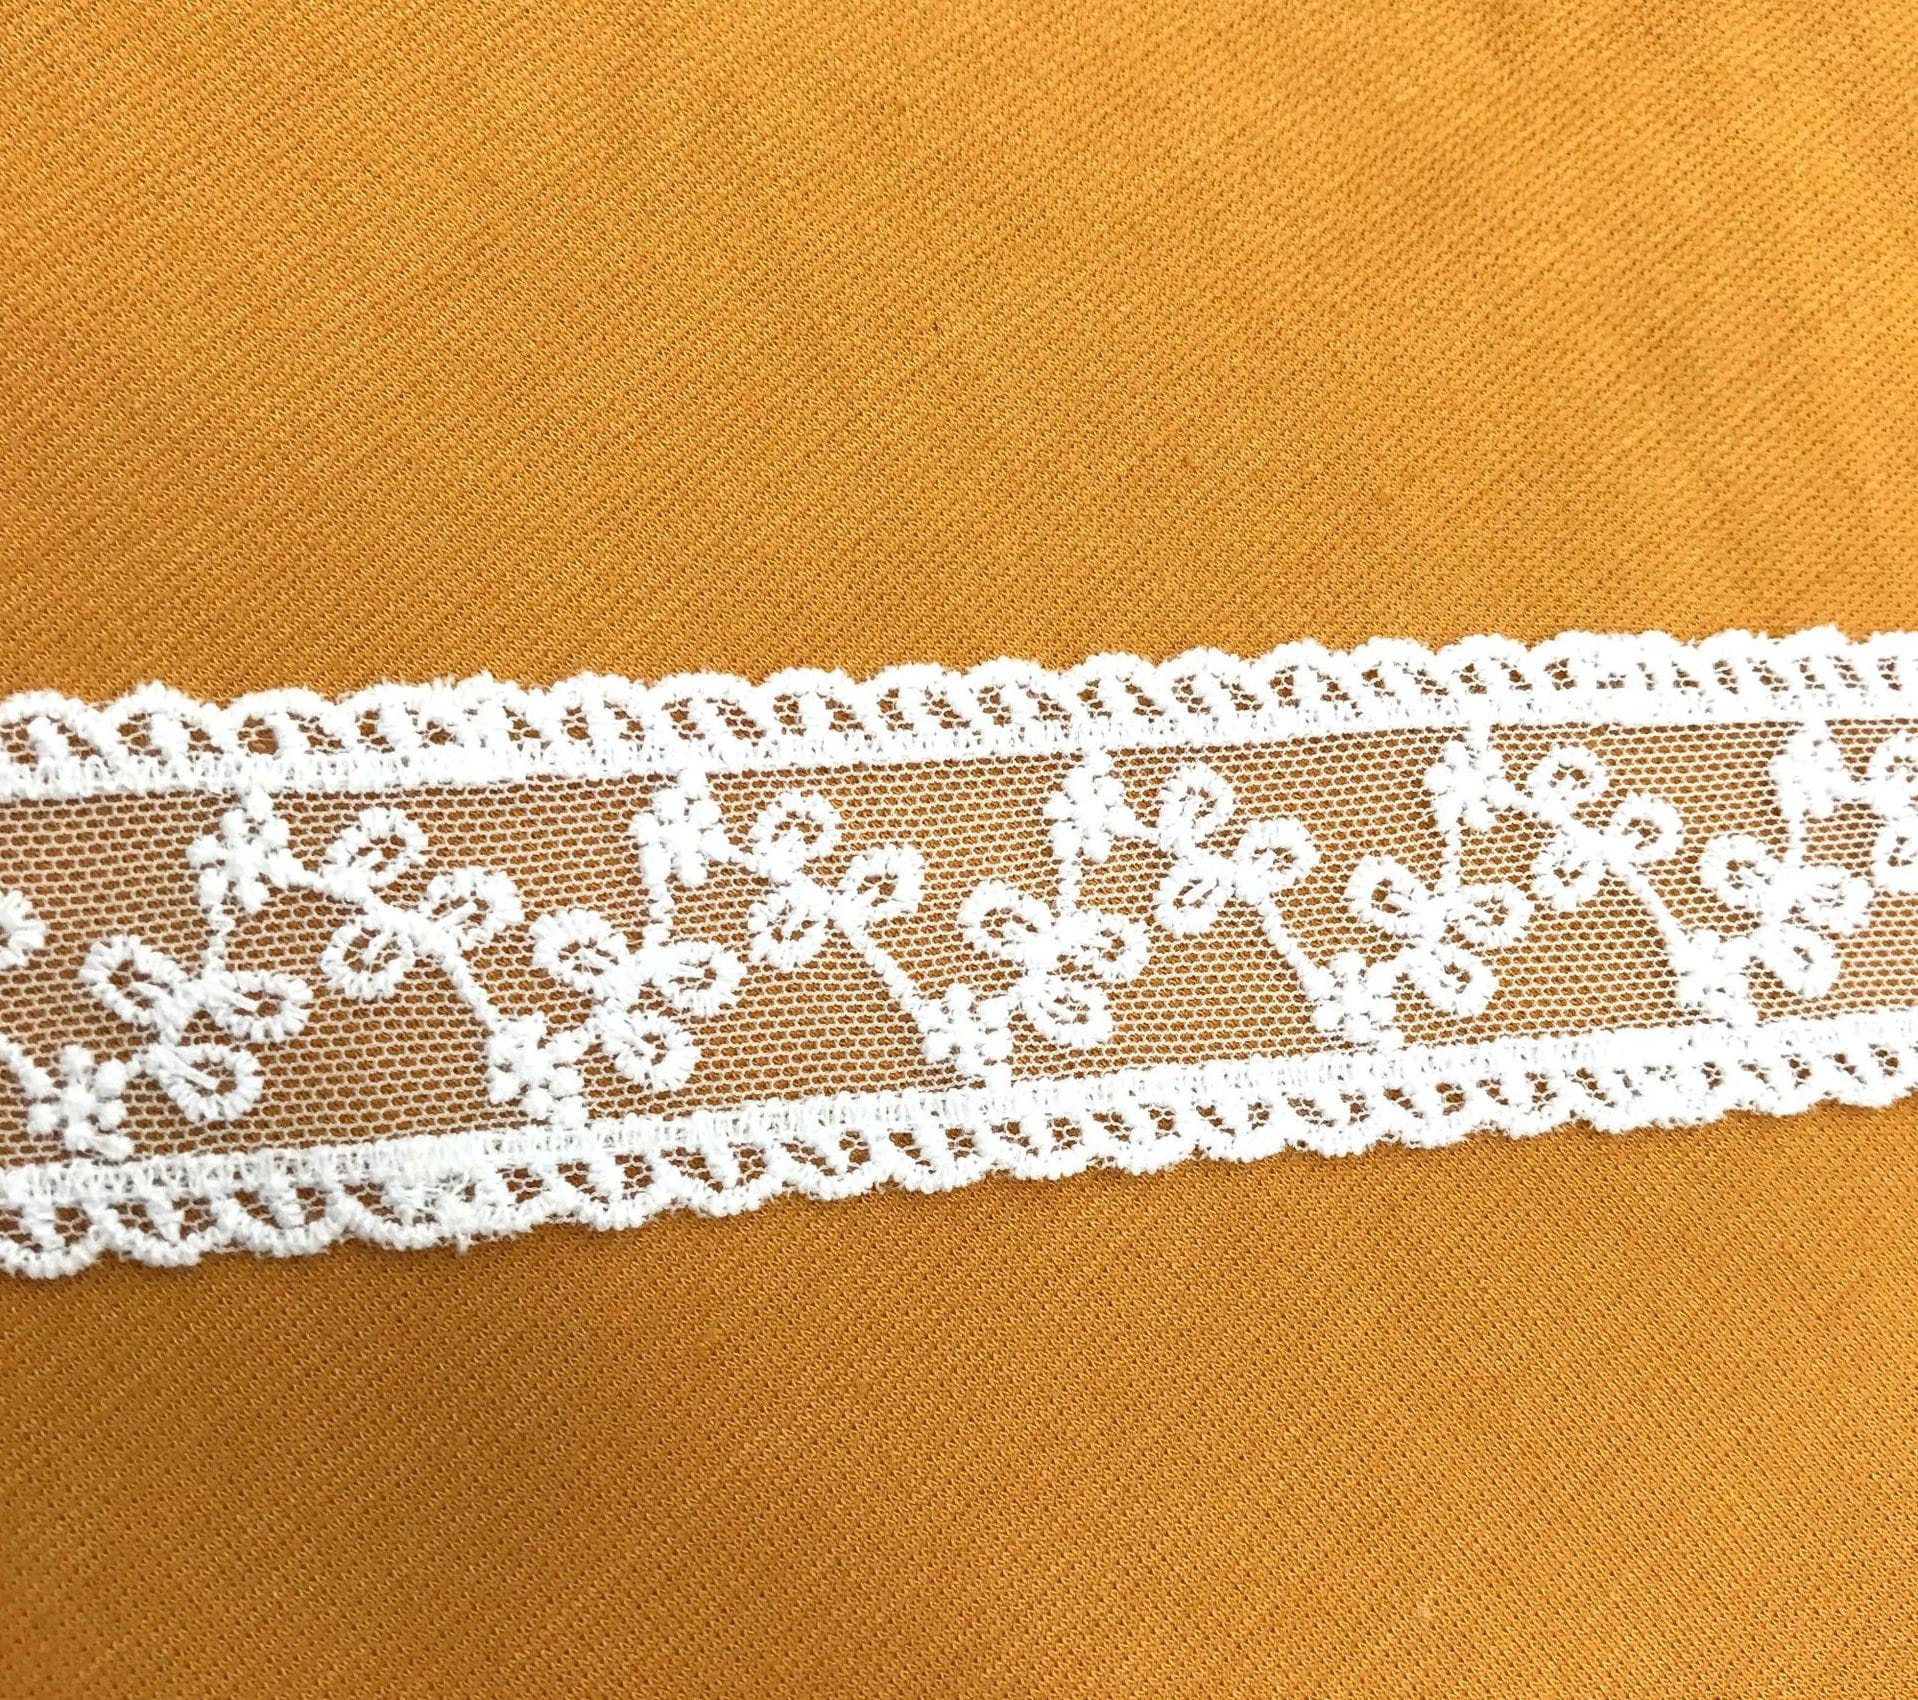 Soft Tulle Insertion Lace Trim Embroidered White 3cm Width Beautiful Netted Mesh Floral Motif Rose Wedding Sewing Decor Invitation Runner